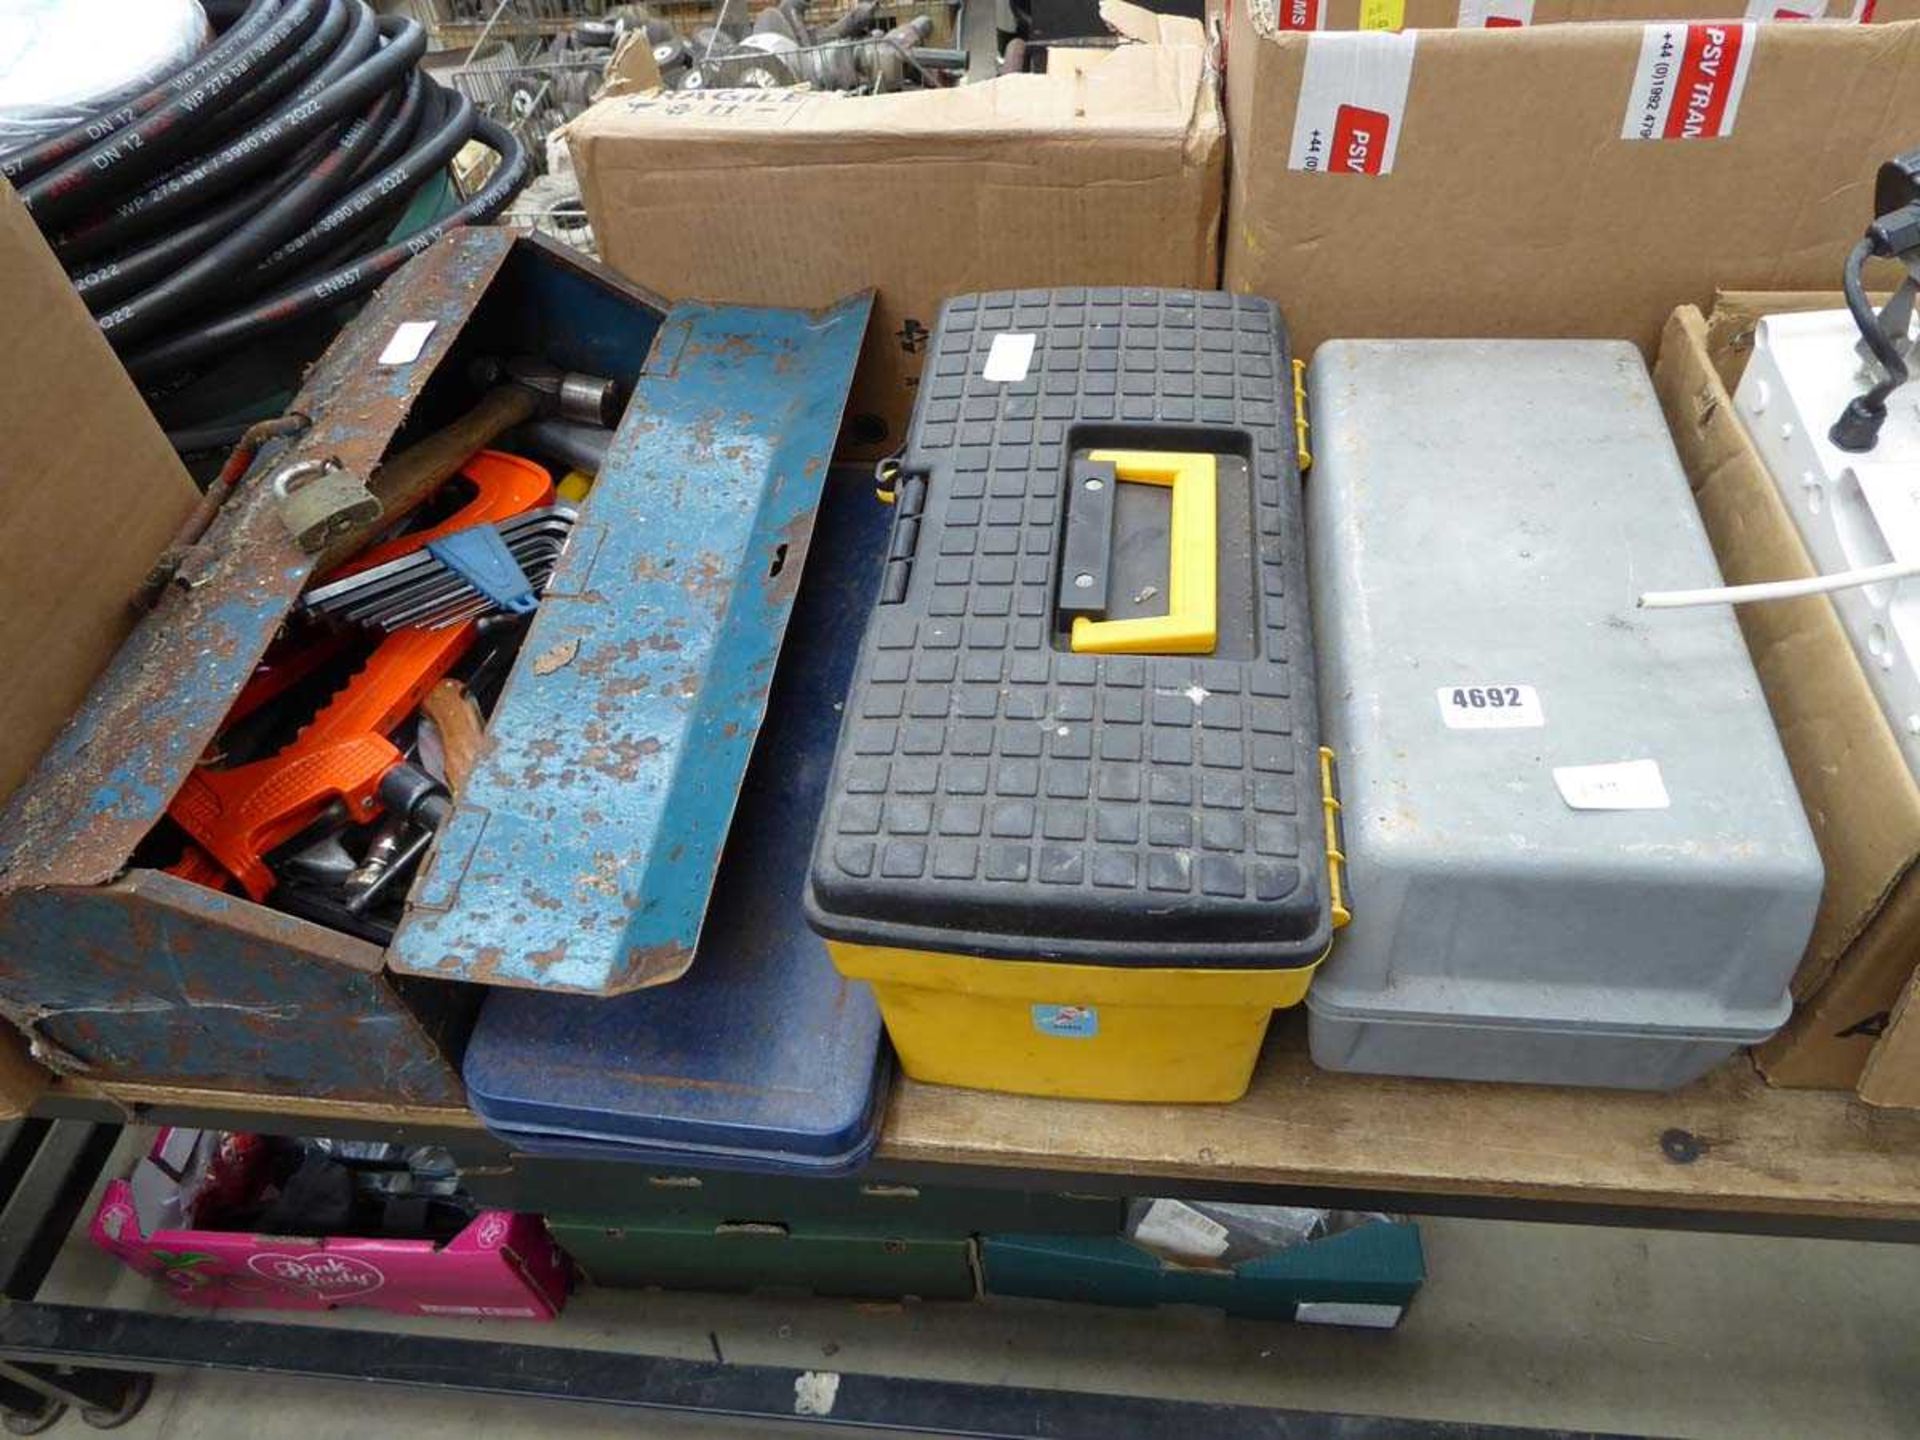 3 toolboxes containing various tools inc. spanners, ratchets, clamps, Allen keys etc.